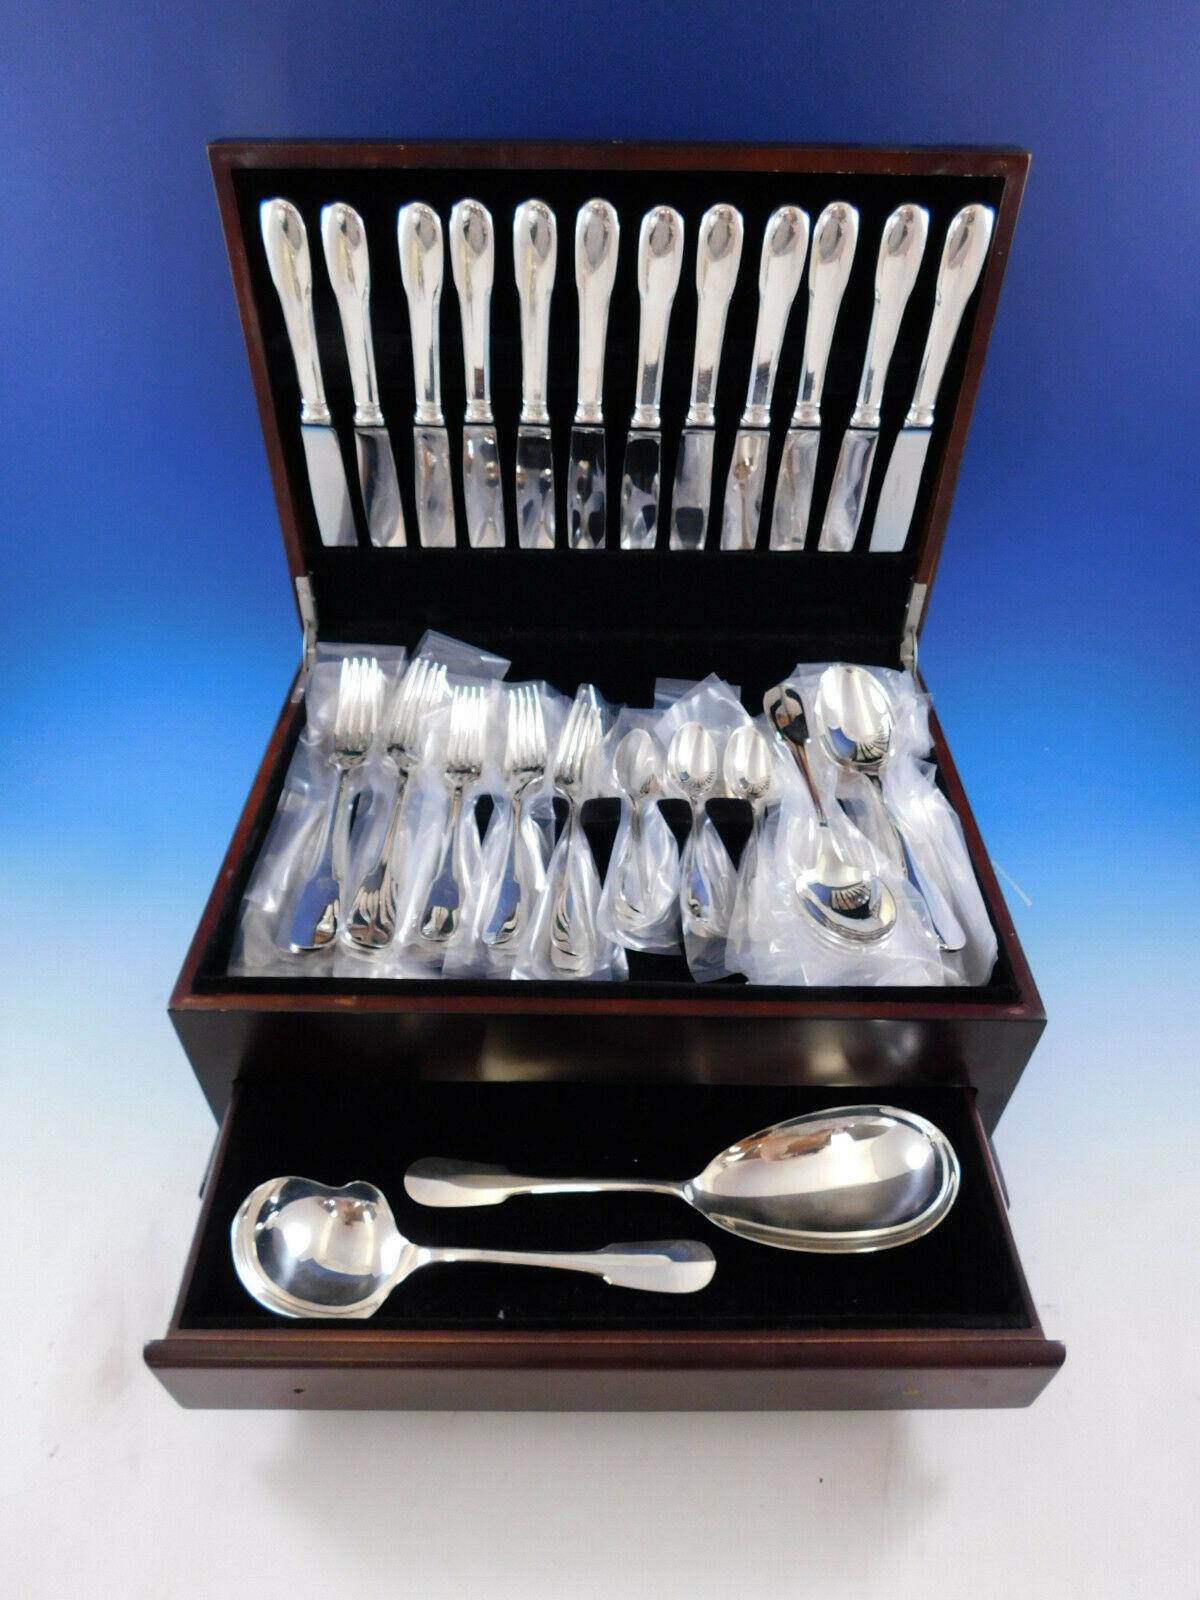 Dinner size Cluny by Christofle France estate silver plate flatware set of 62 pieces. This set includes:

12 dinner size knives, 9 1/2